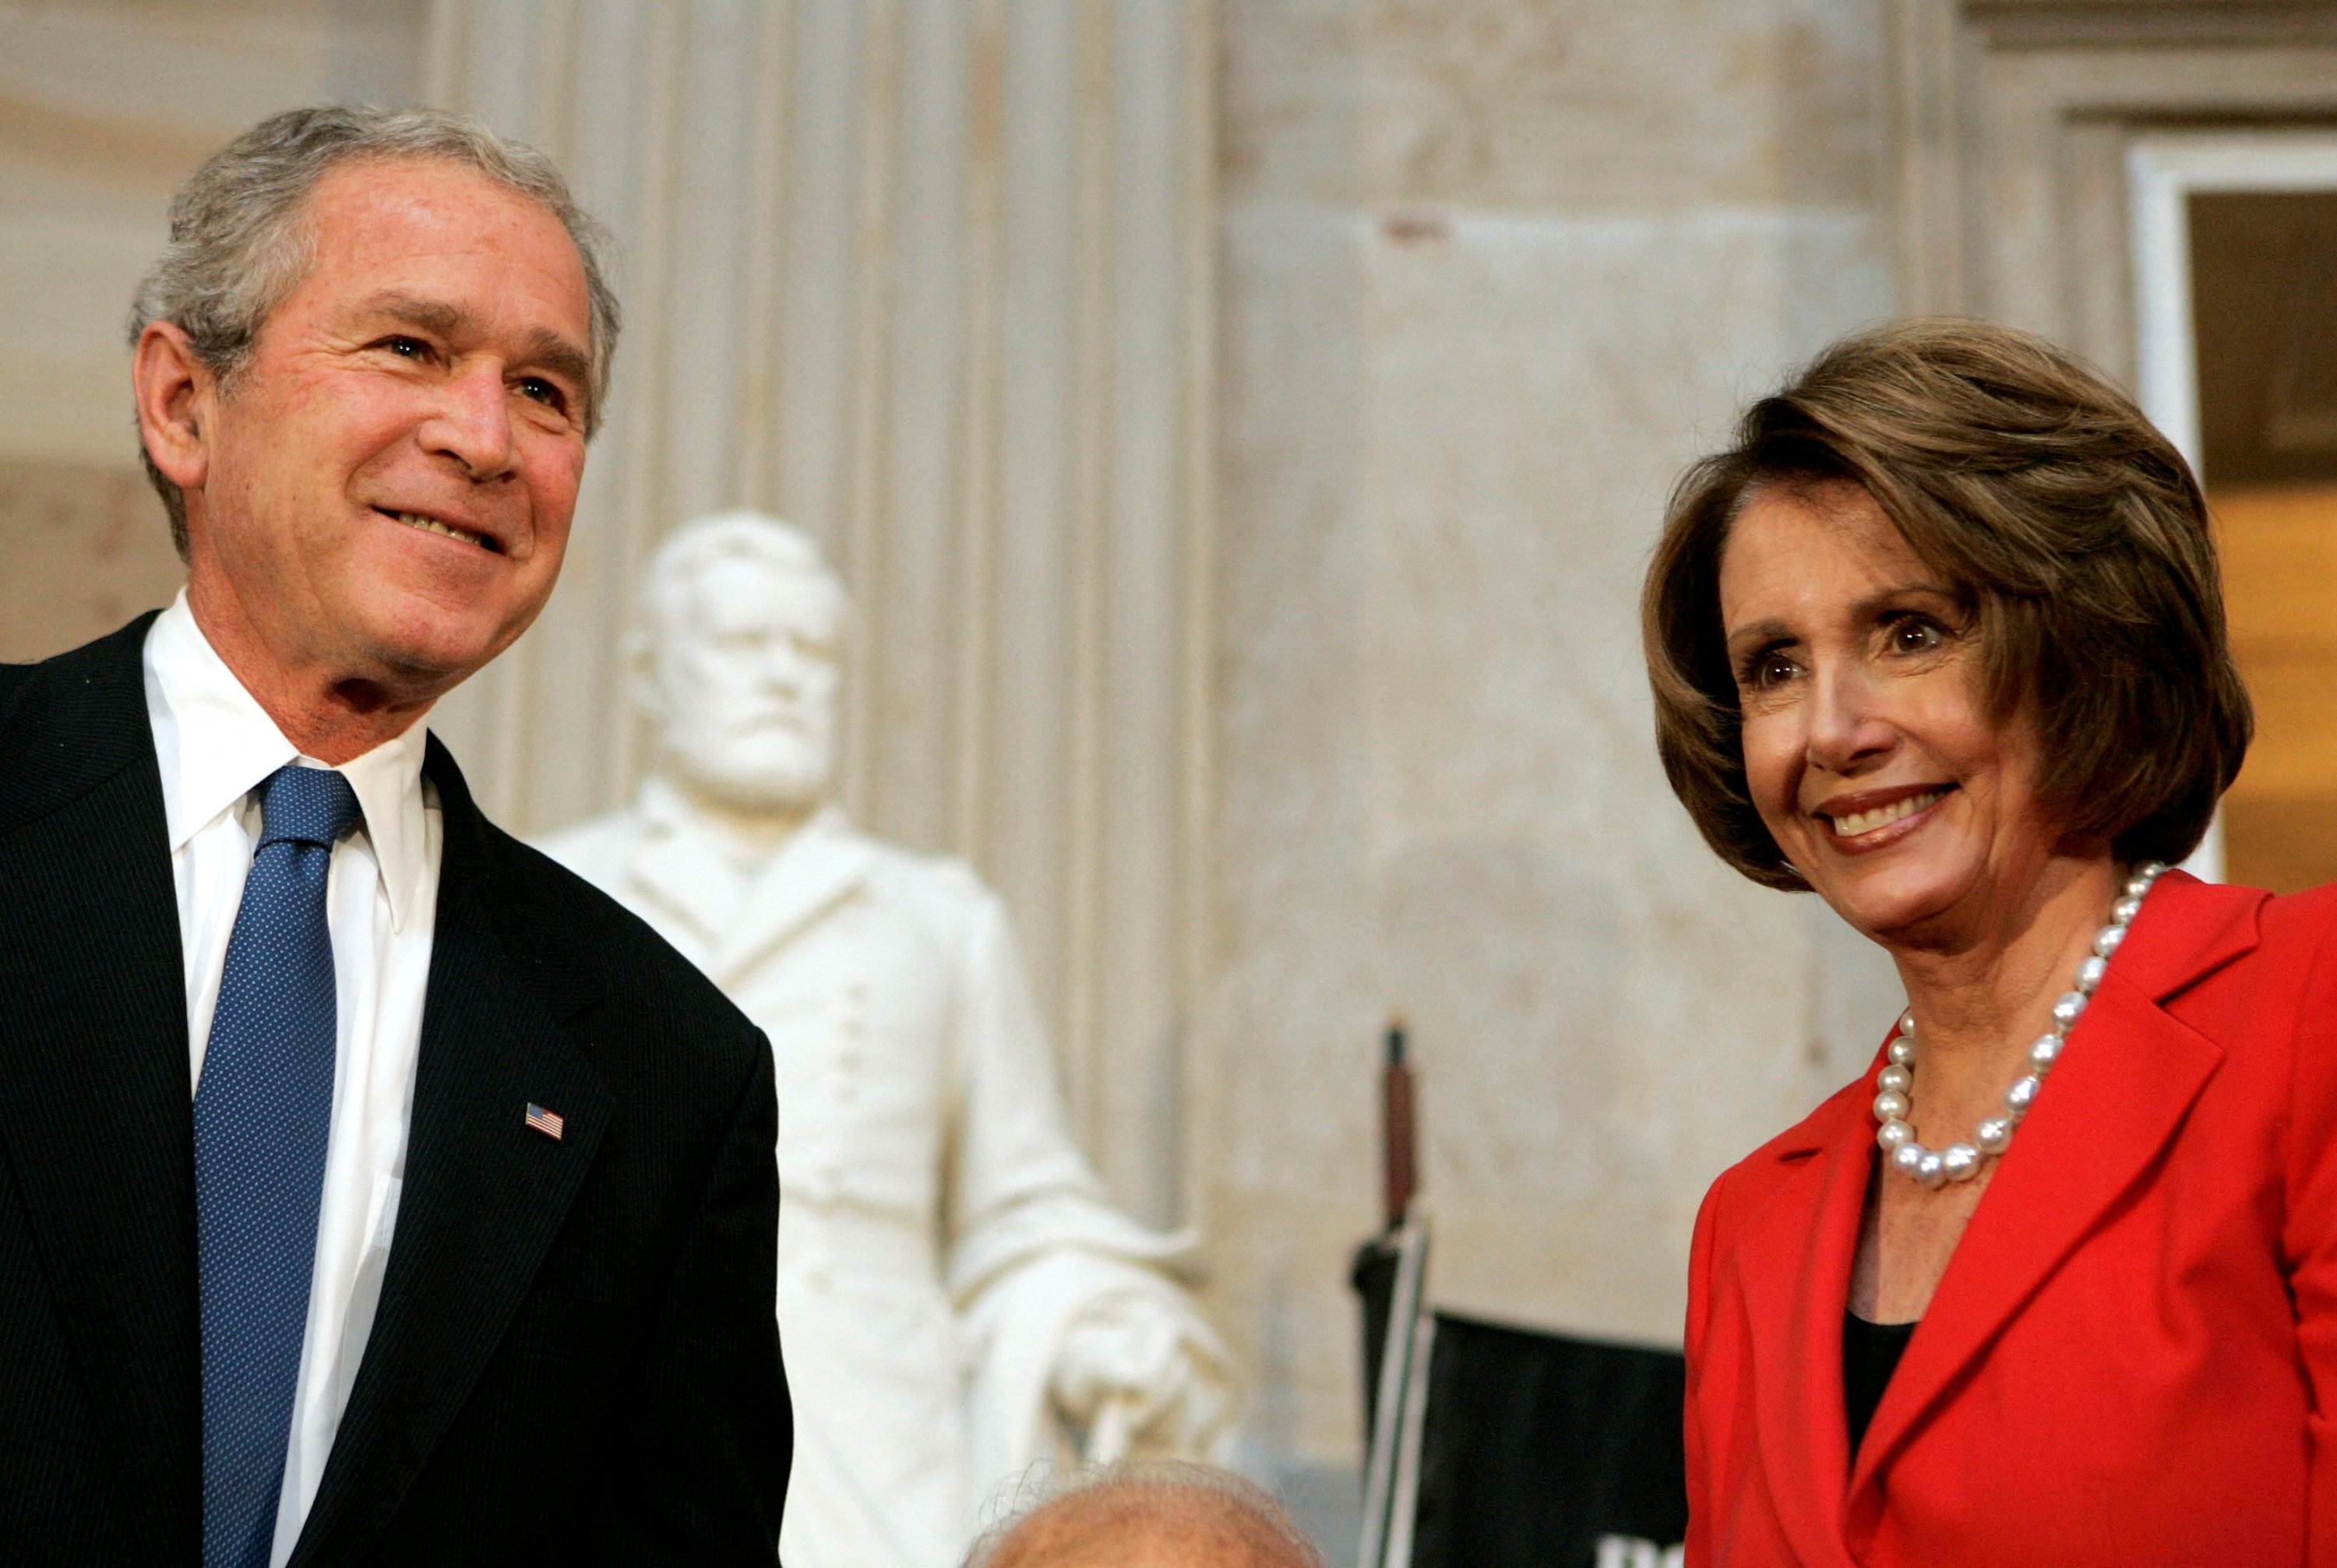 U.S. President George W. Bush (L) and Speaker of the House Nancy Pelosi attend the Congressional Gold Medal ceremony awarding the nation's highest civilian honor to Dr. Michael Ellis DeBakey (not pictured) in the capitol rotunda on Capitol Hill in Washington, U.S., April 23, 2008. (Reuters File Photo)